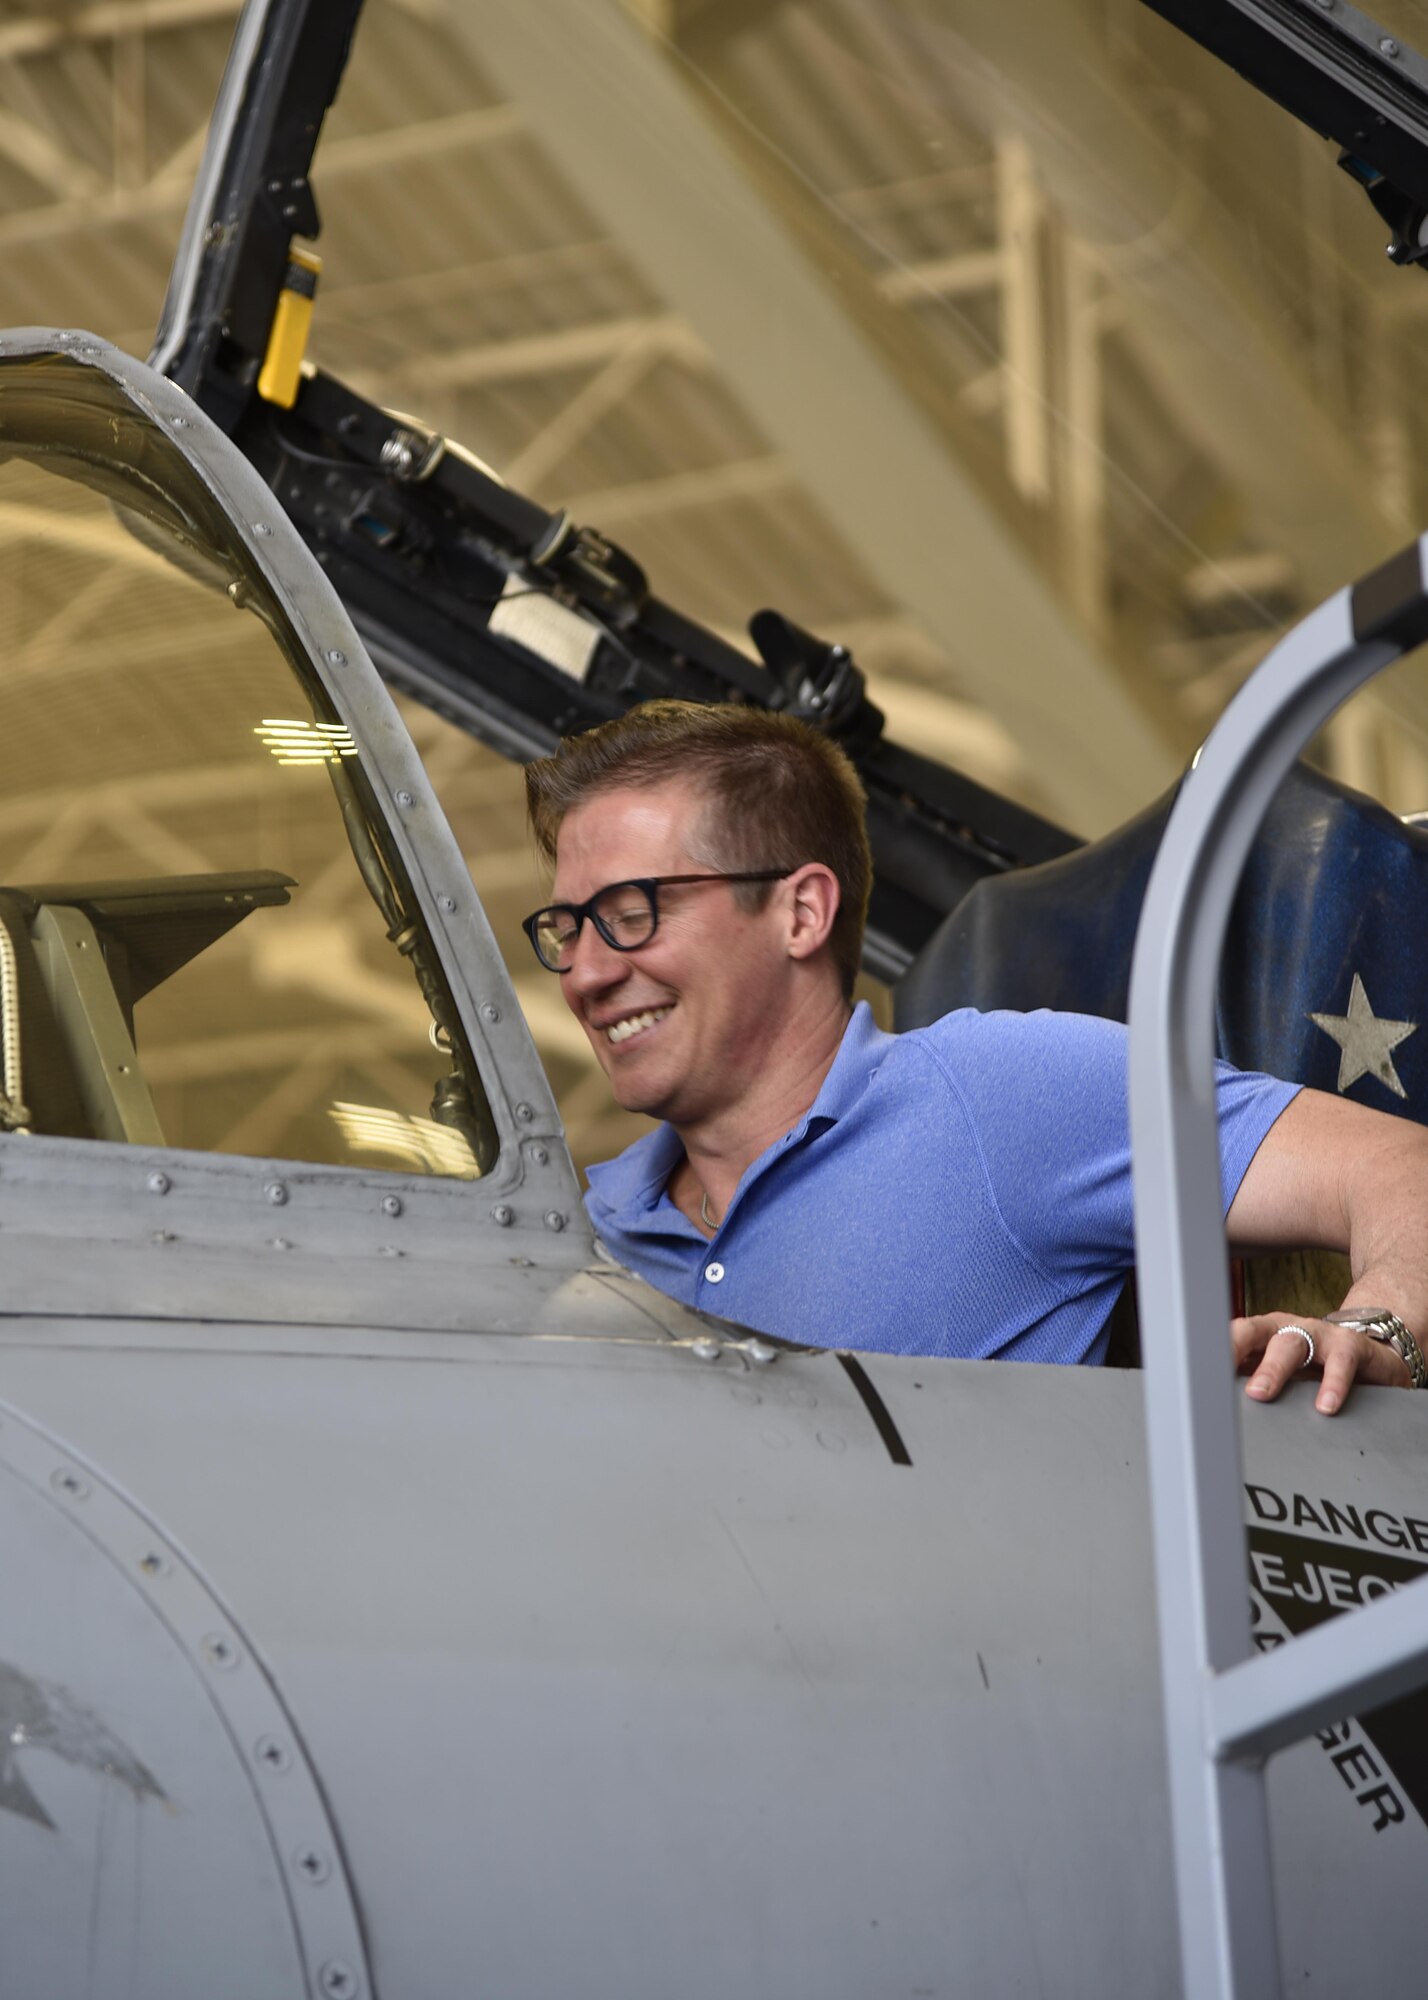 A member of the Office of Cost Assessment and Program Evaluation sits inside the cockpit of an A-10C Thunderbolt II aircraft June 1, 2017, in the fuel cell hangar at Warfield Air National Guard Base, Md. More than 30 CAPE members traveled to Warfield to participate in a base tour and were shown various aspects of the base, including hangers, aircraft and the dining facility. (U.S. Air National Guard photo by Airman Sarah M. McClanahan /Released Master Sgt. Chris Schepers)